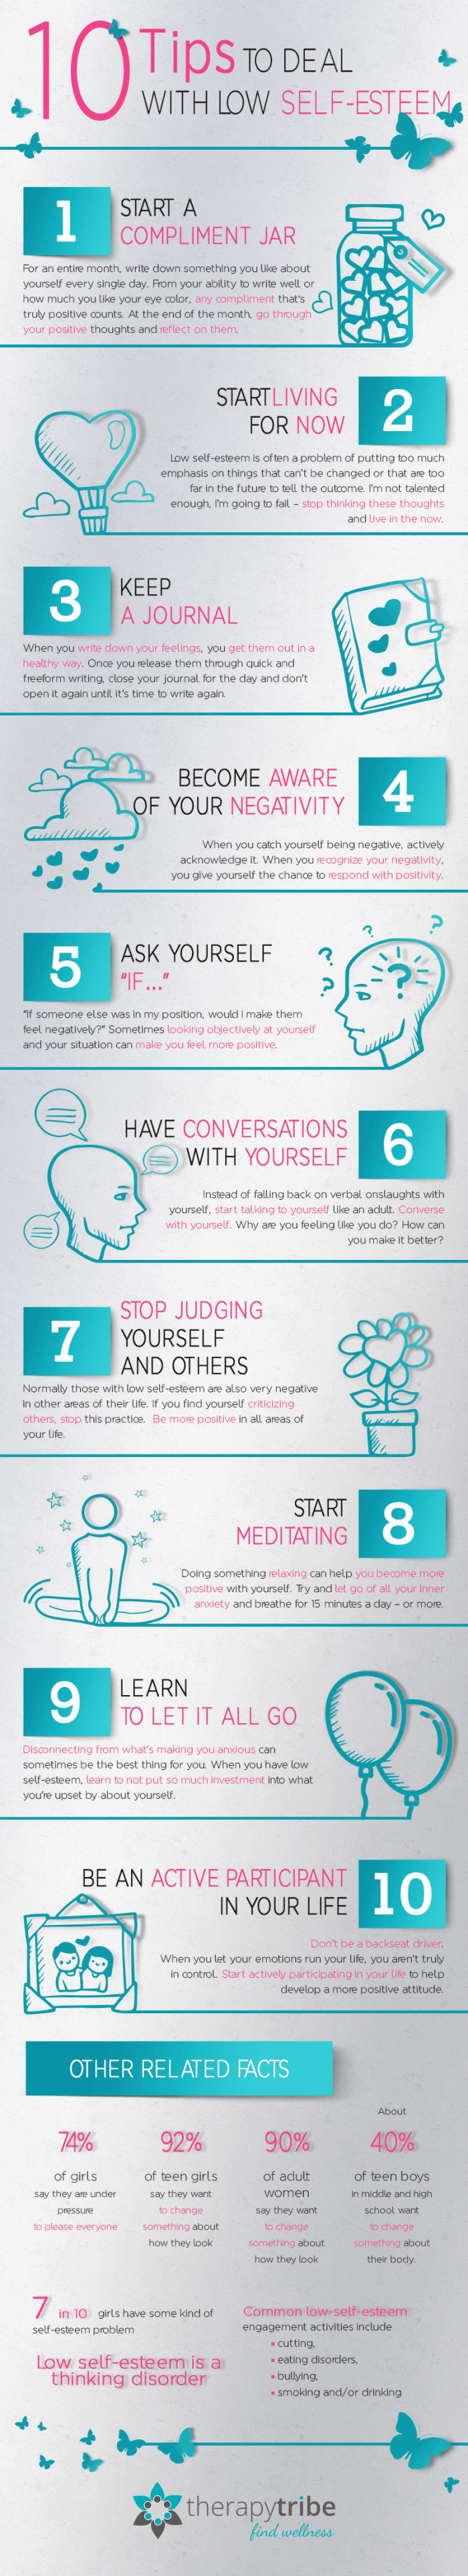 10-tips-to-deal-with-low-self-esteem